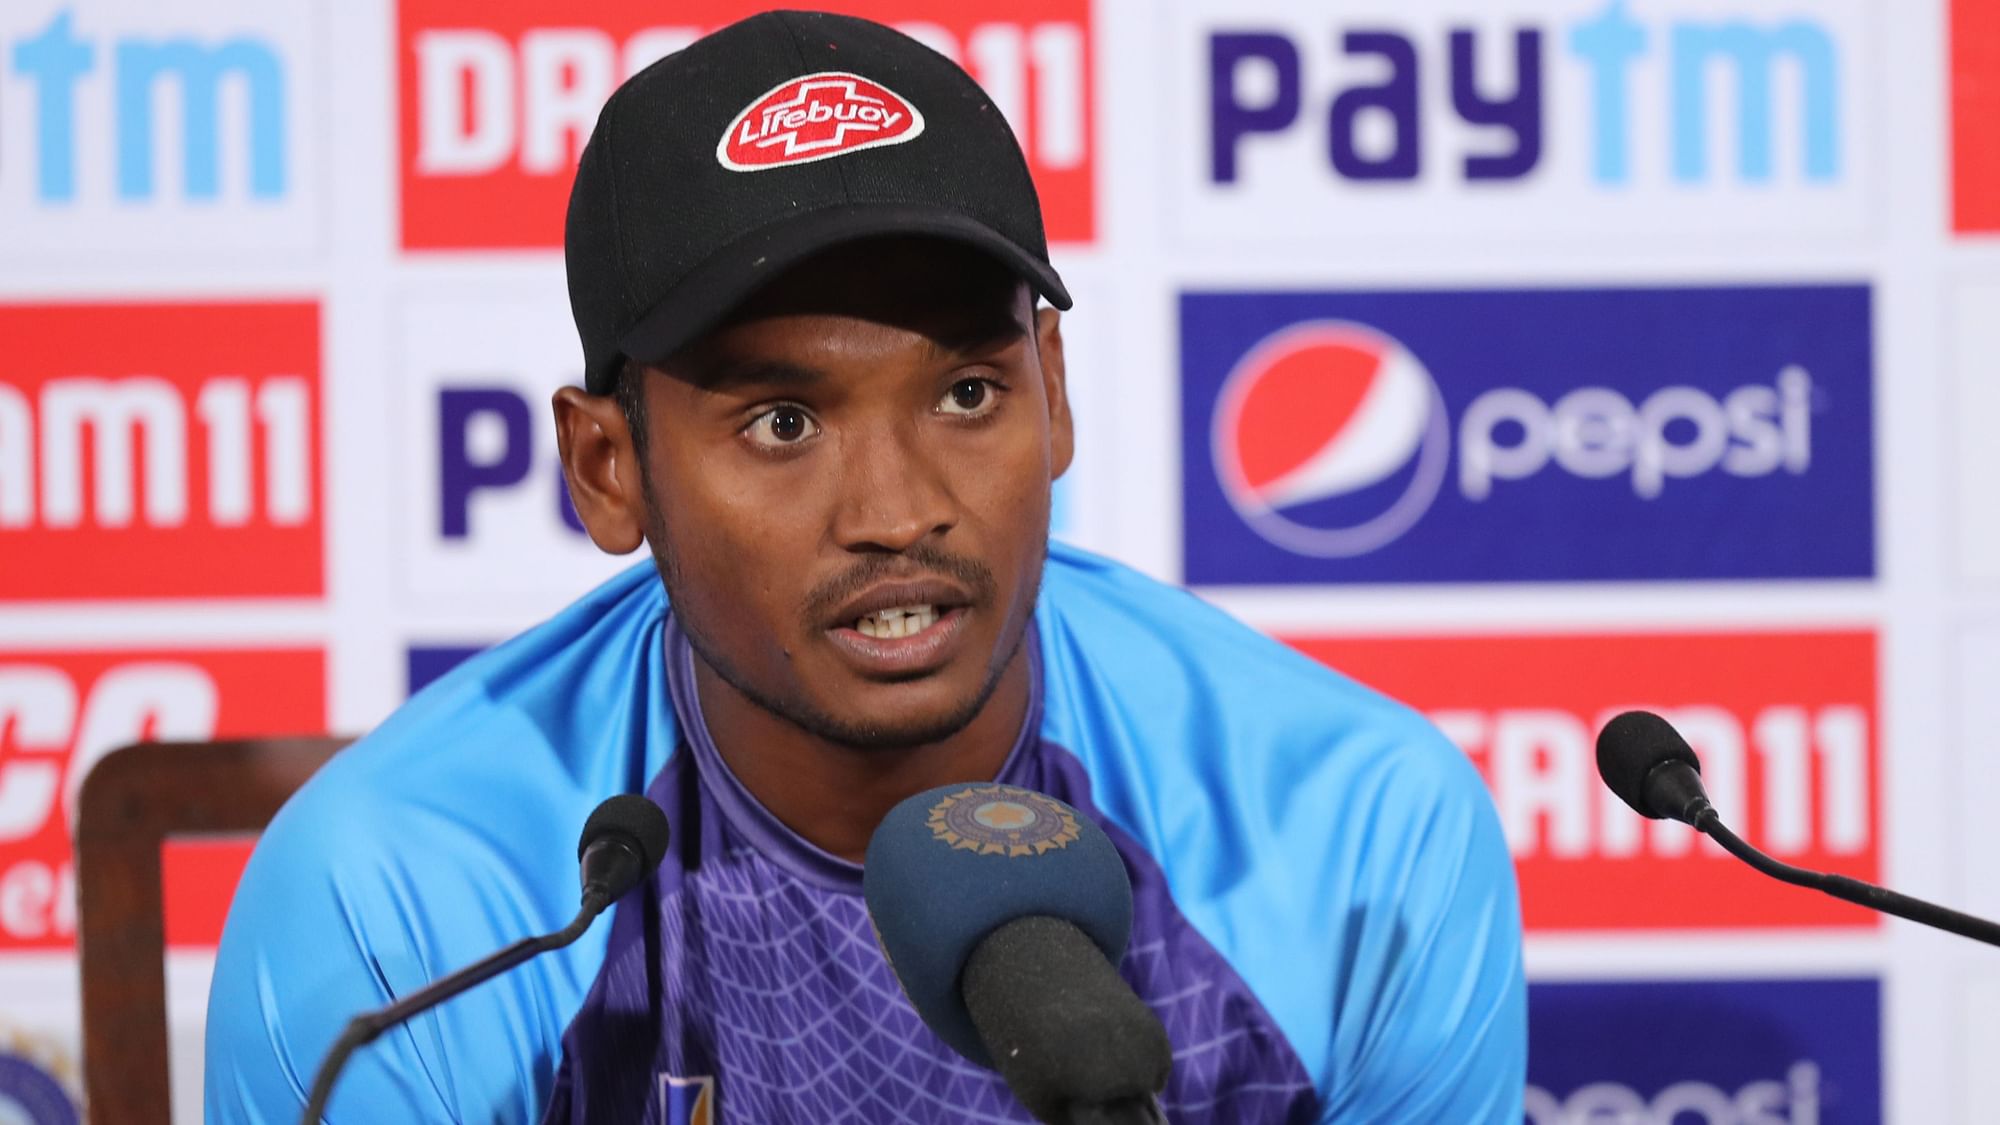 Al-Amin Hossain of Bangladesh addressing the media during day 2 of the 2nd Test match between India and Bangladesh held at the Eden Gardens Stadium, Kolkata on Saturday, 23 November.